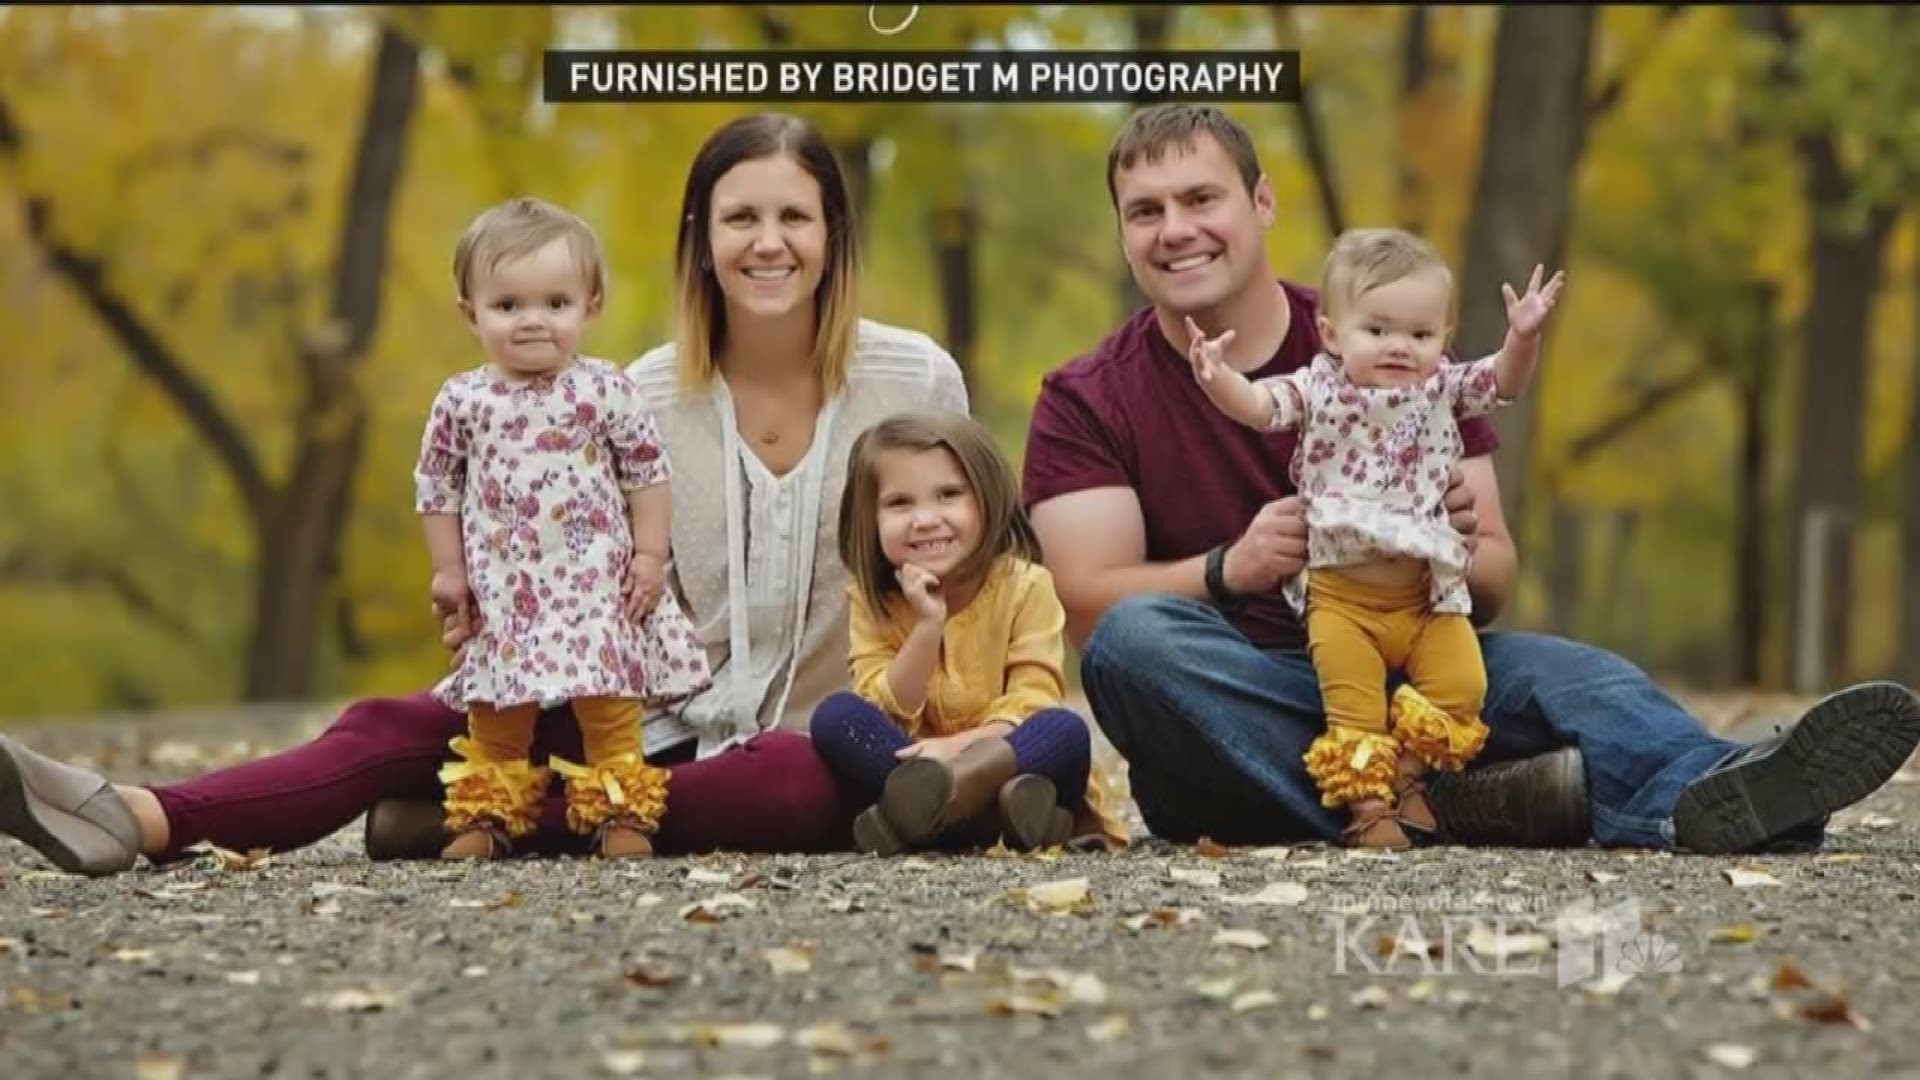 Fundraising efforts to help twins diagnosed with AML